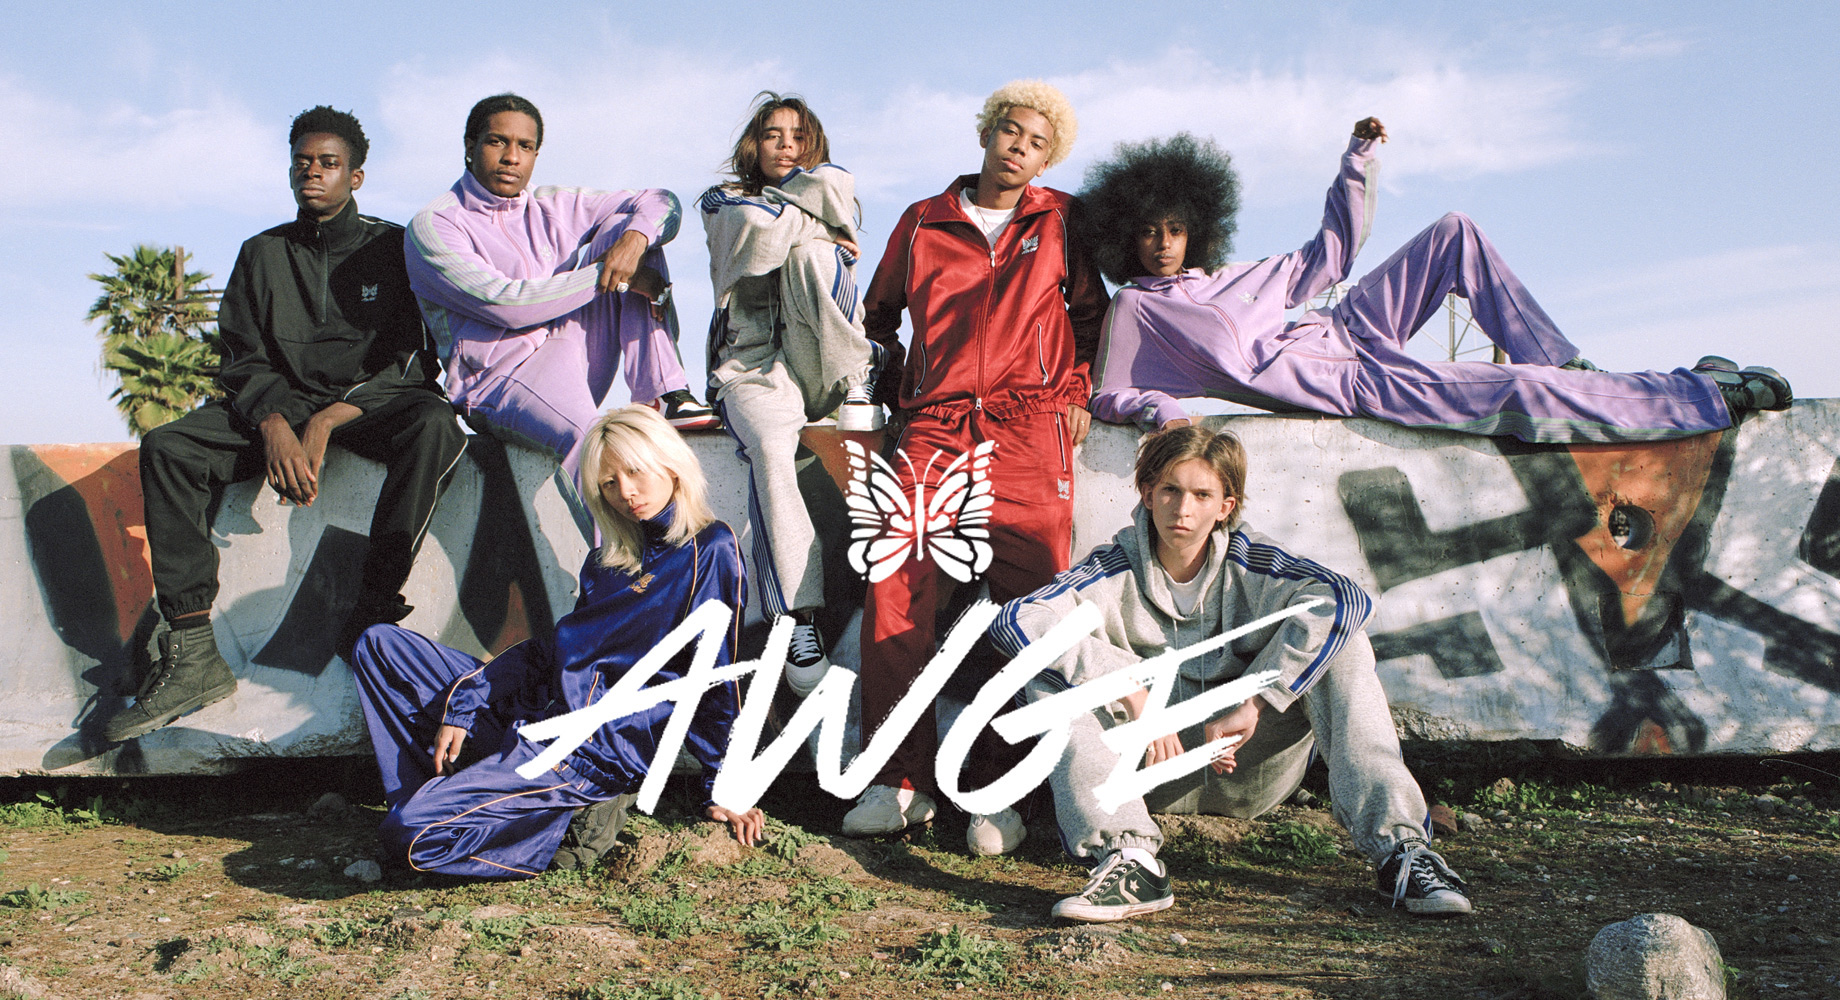 〈NEEDLES〉x〈AWGE〉- COLLABORATION PRODUCTS 2019